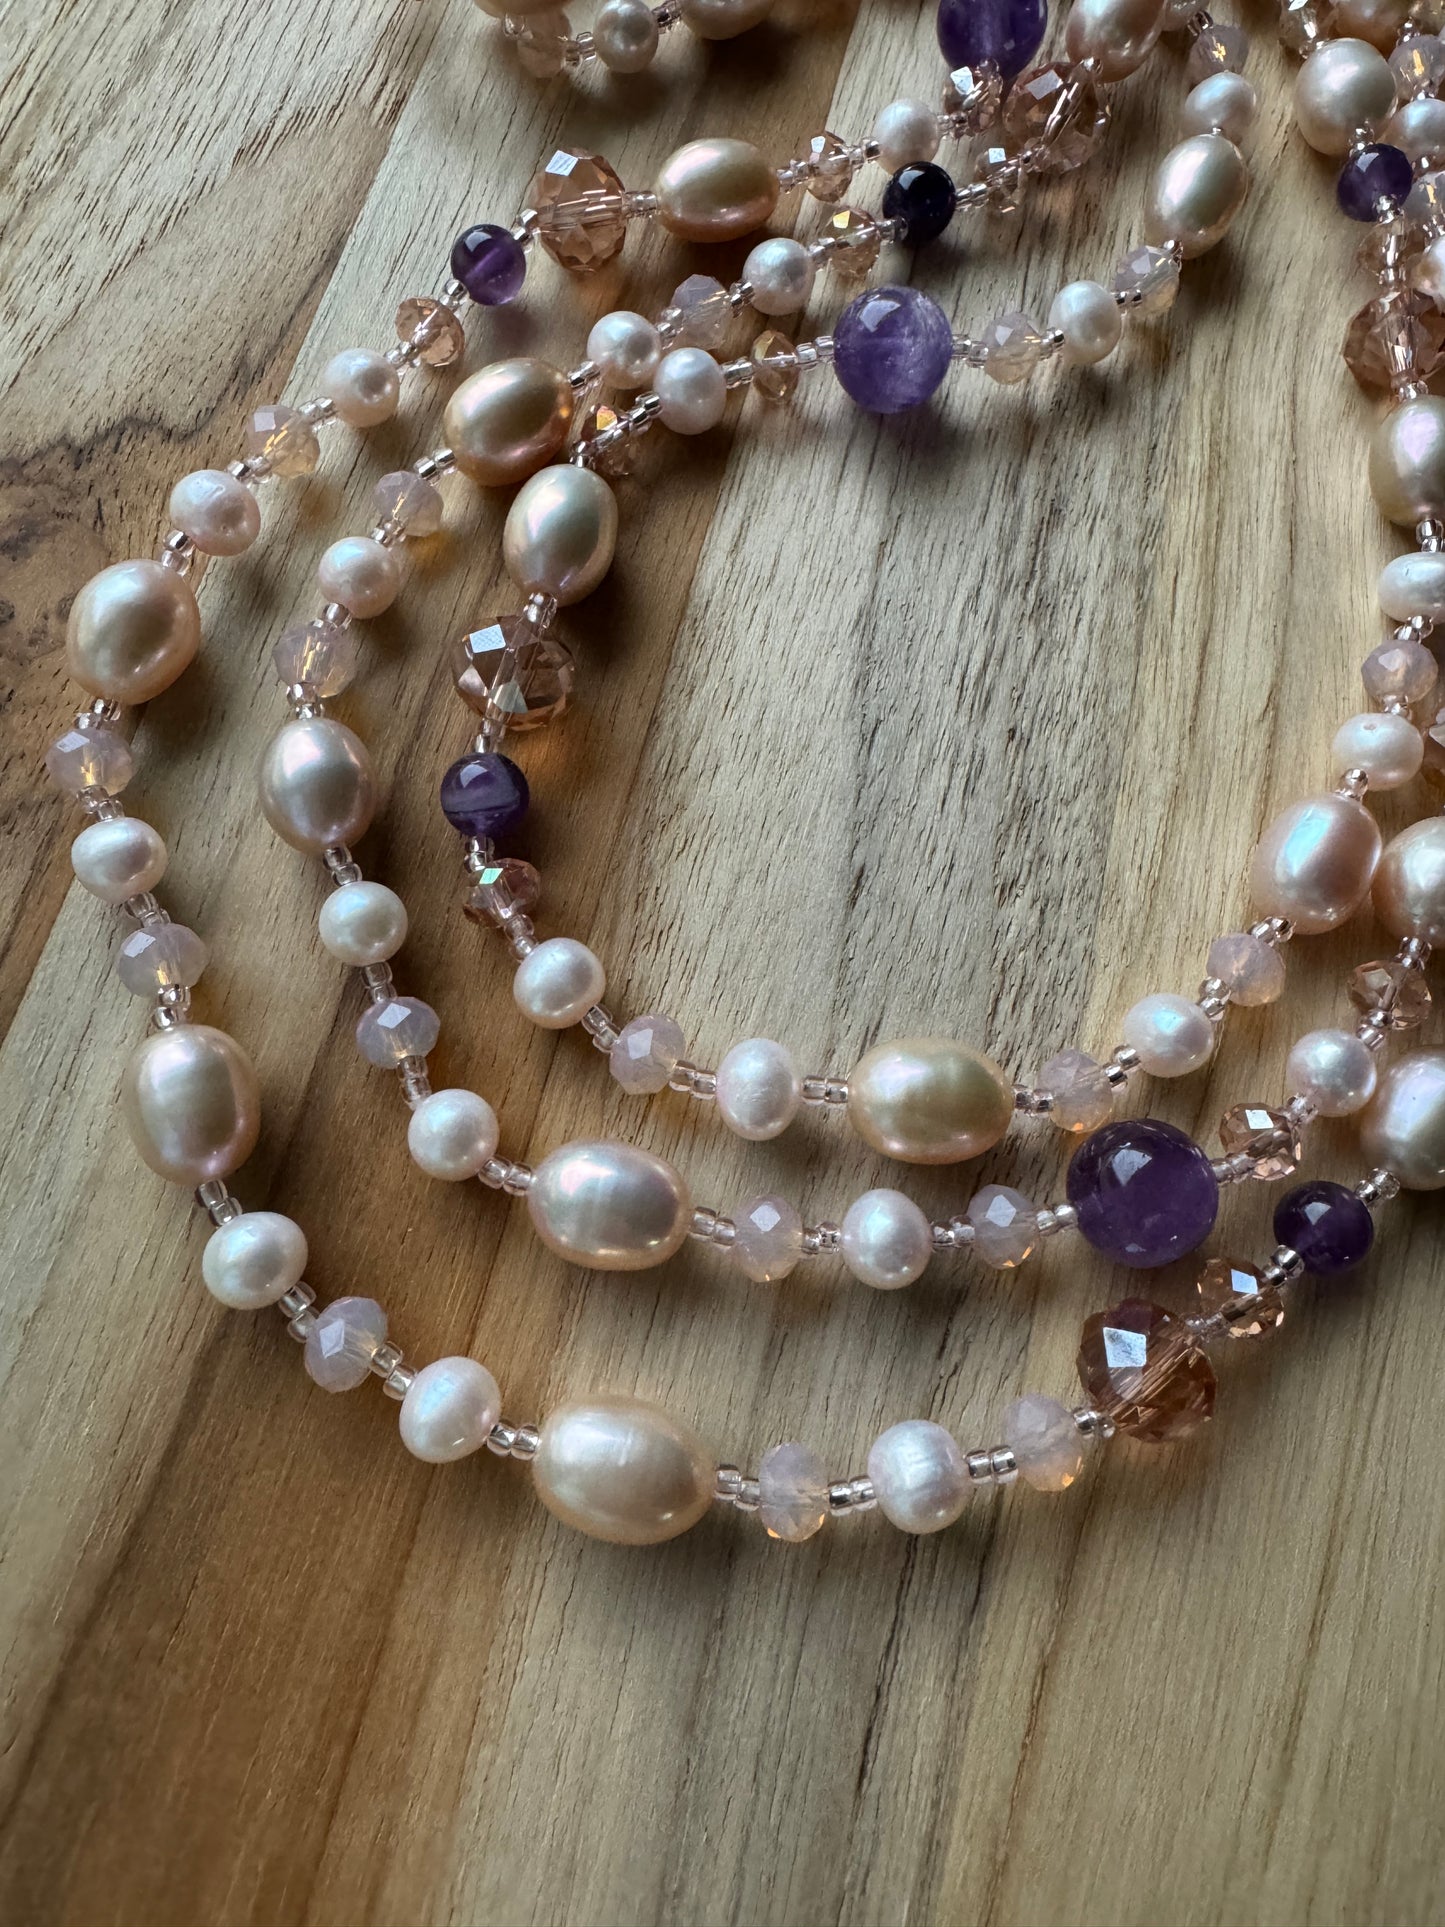 60" Extra Long Ballet Slipper Pink Freshwater Pearl Beaded Necklace with Amethyst and Crystal Beads - My Urban Gems